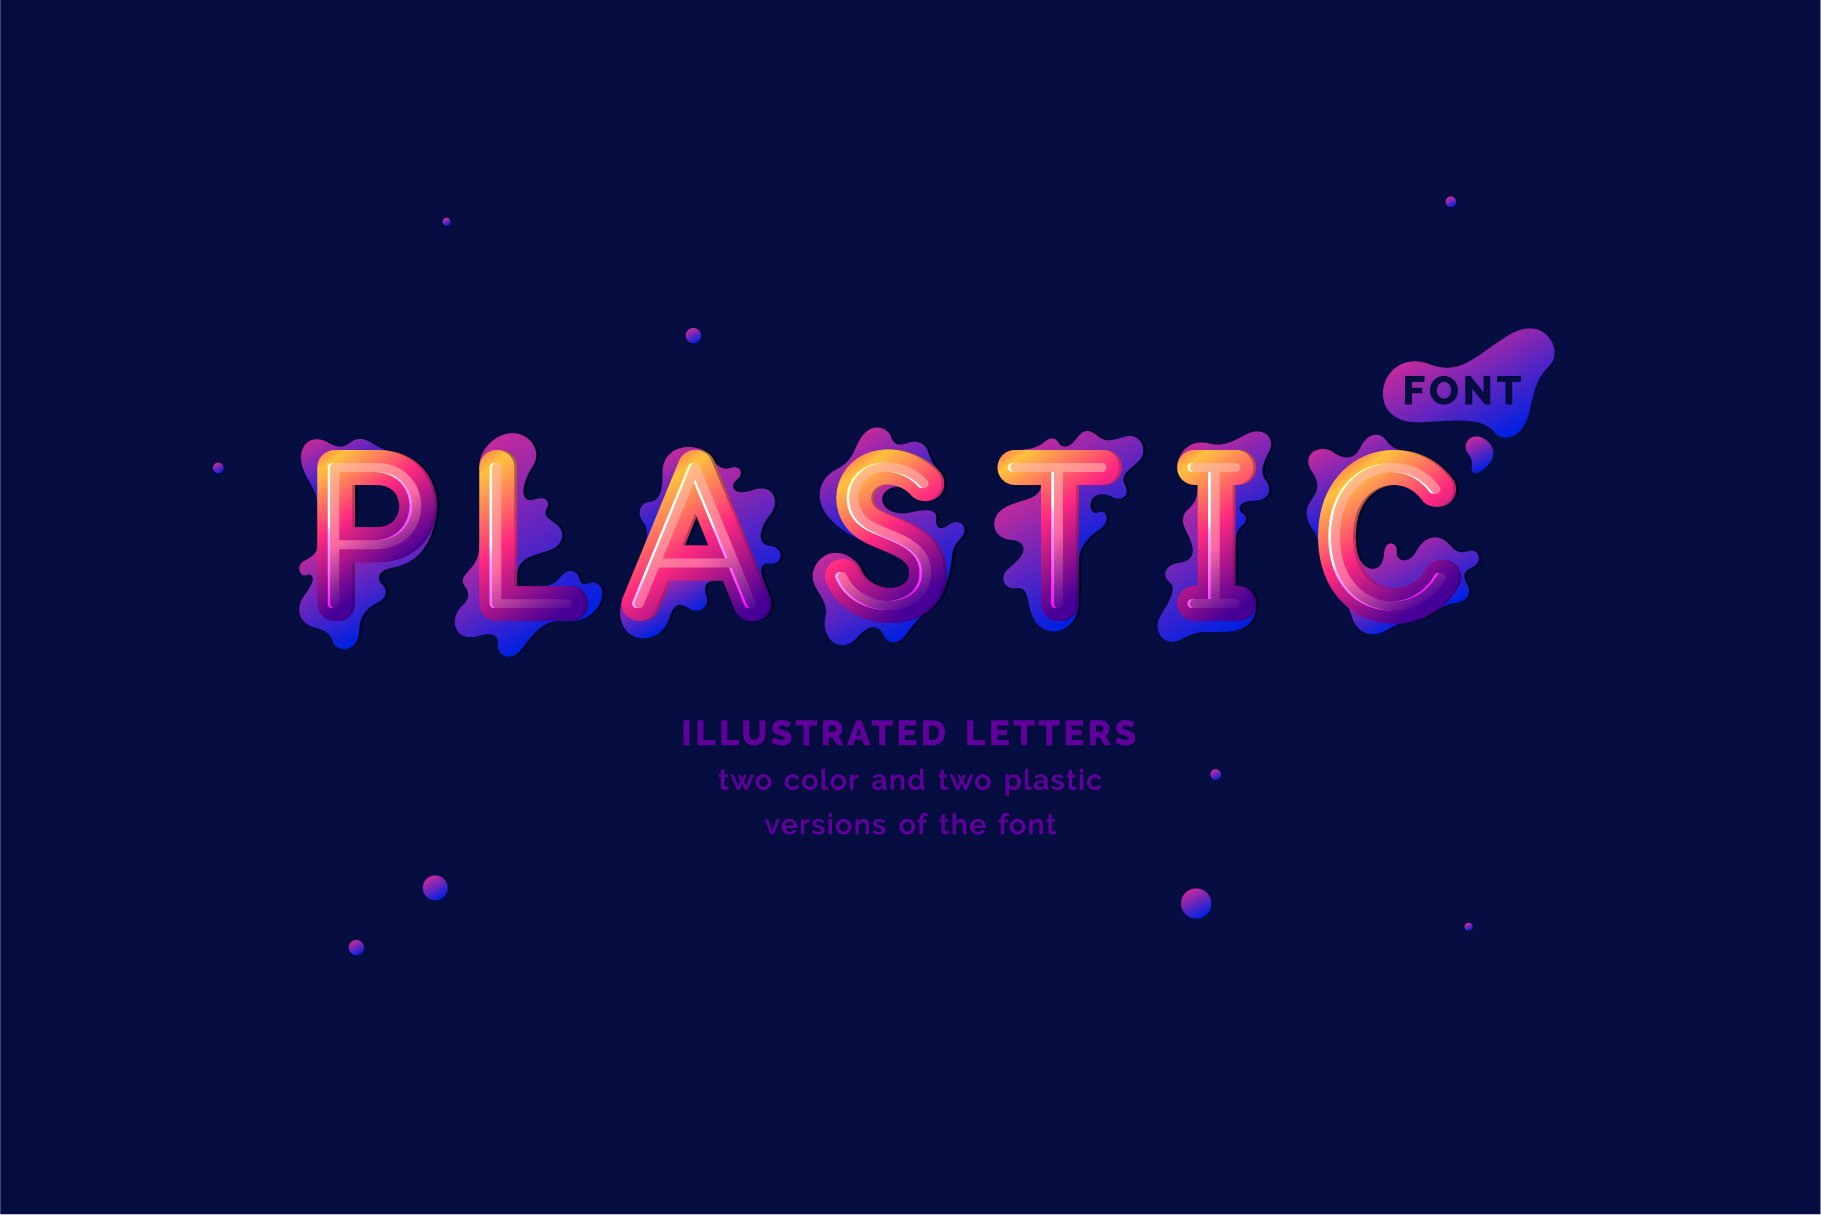 Plastic font / Illustrated letters cover image.